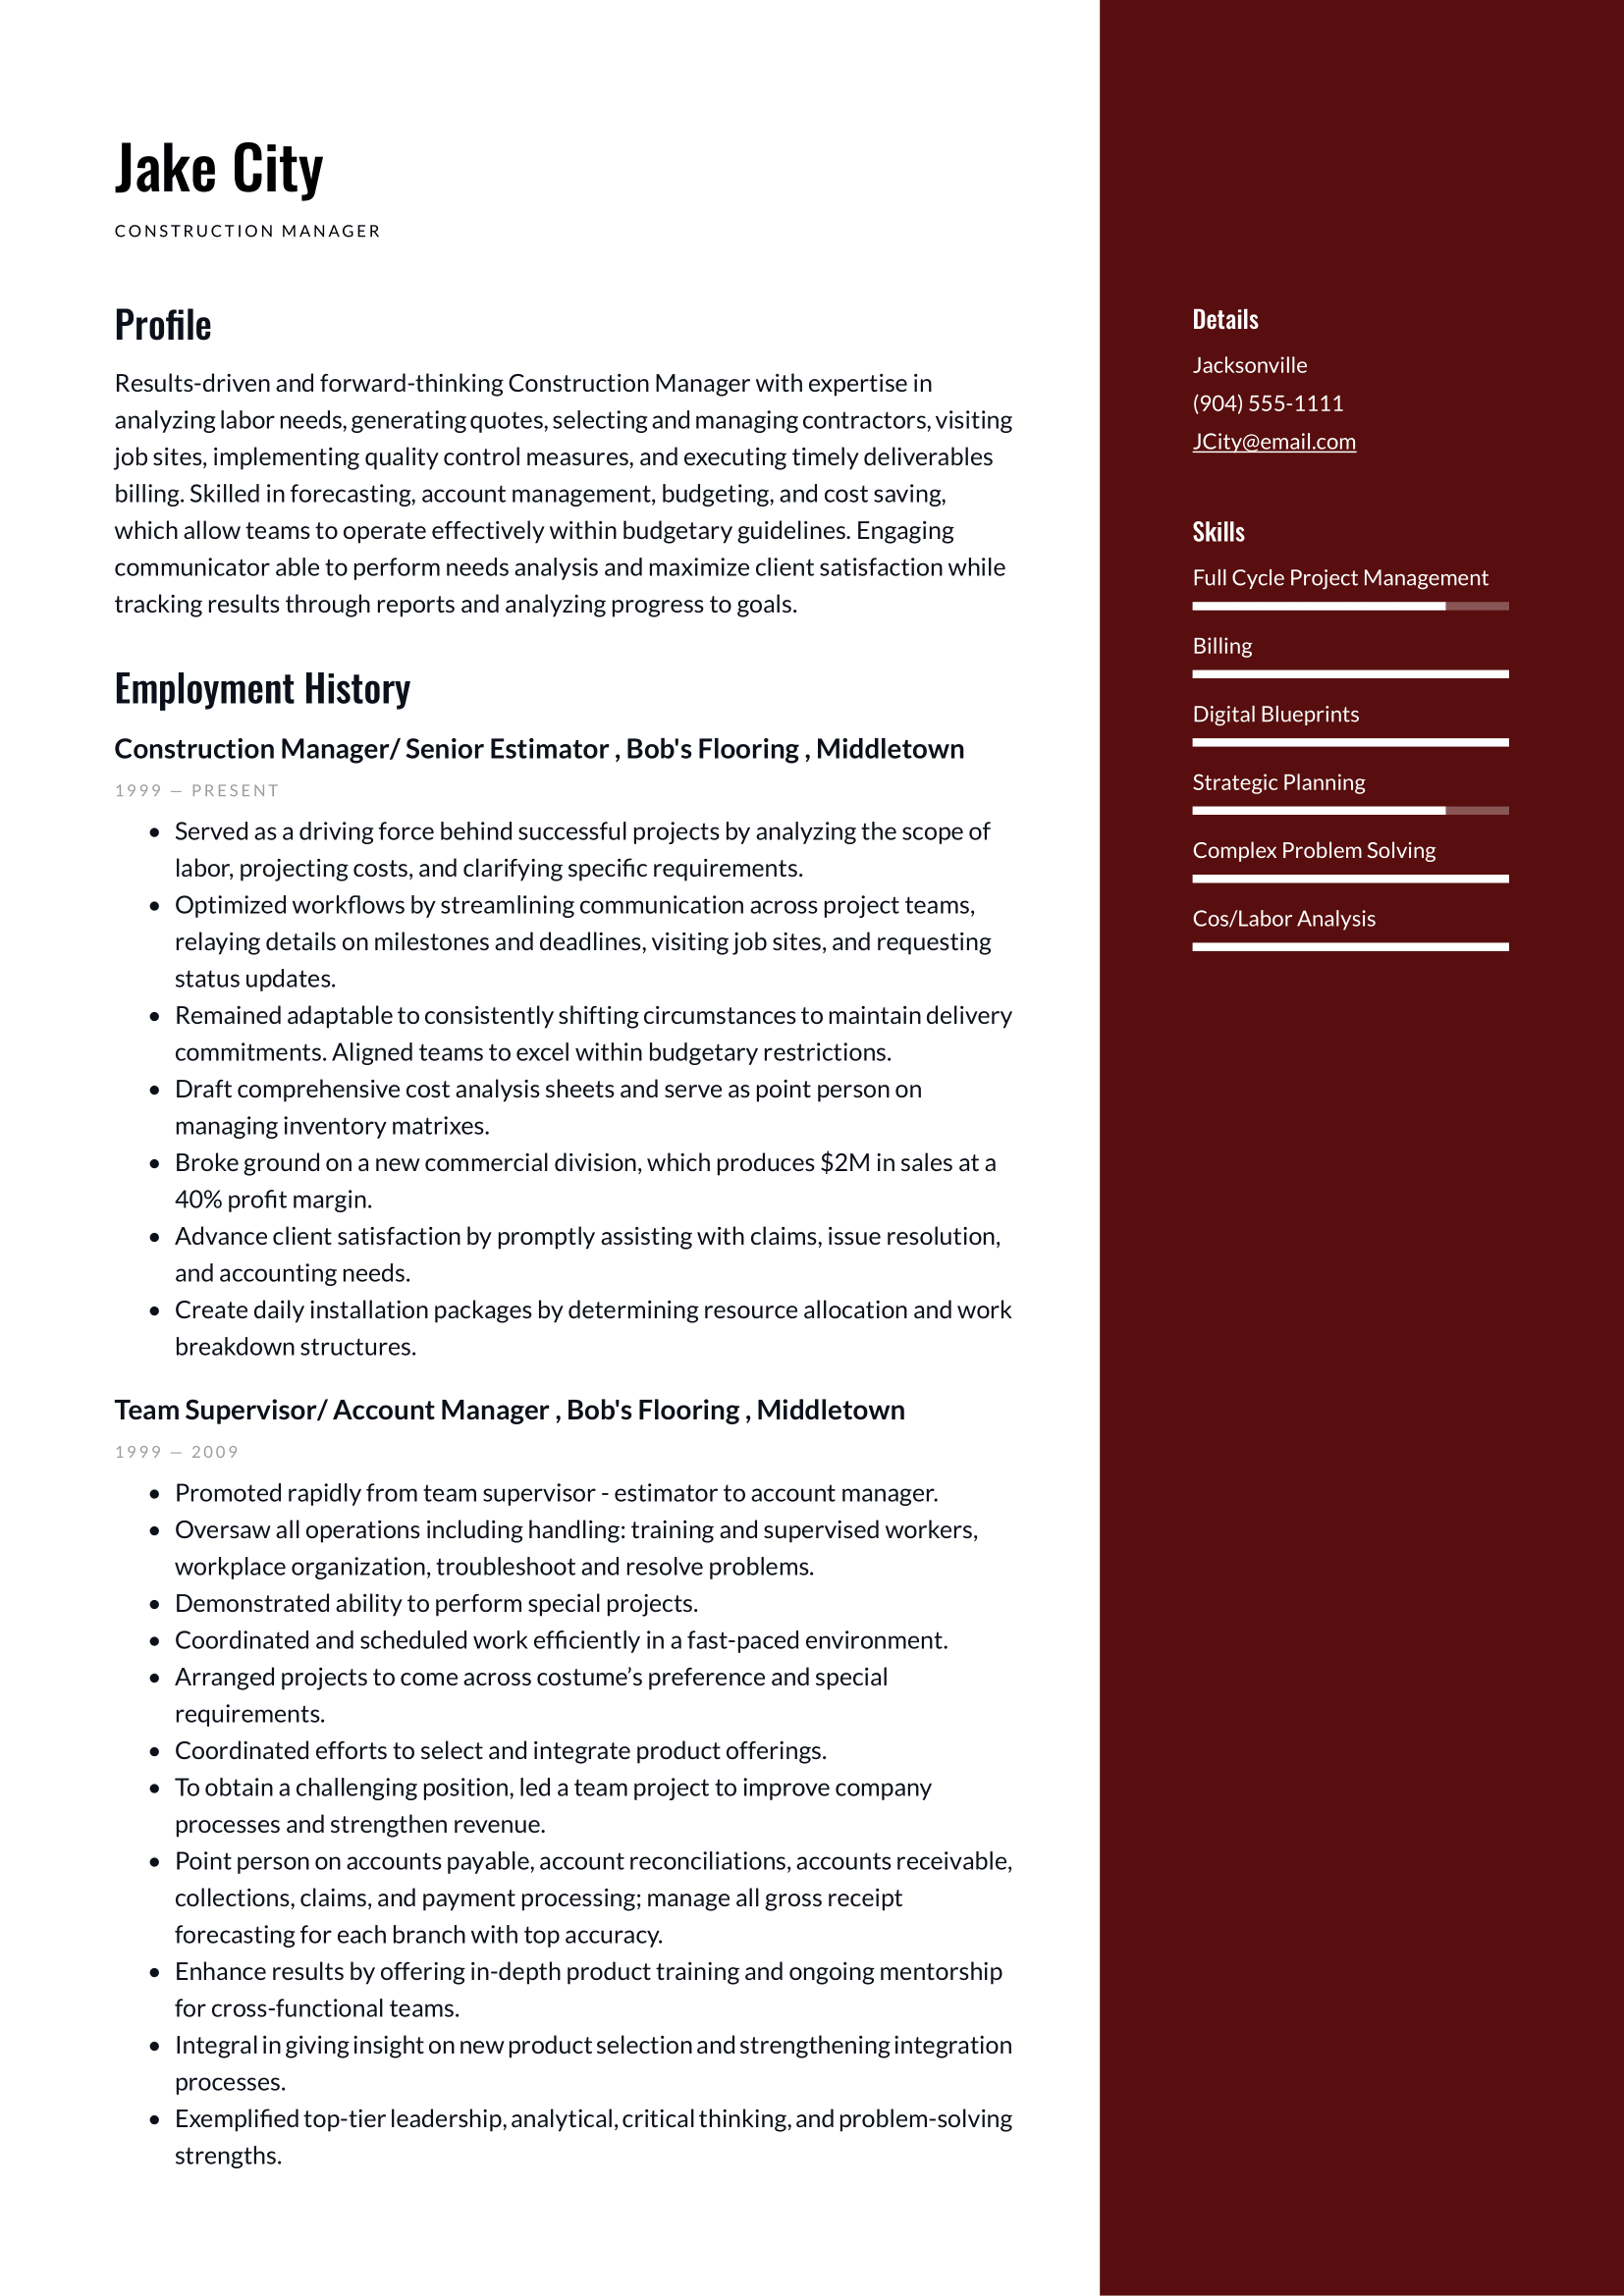 Construction_Manager-Resume example.png